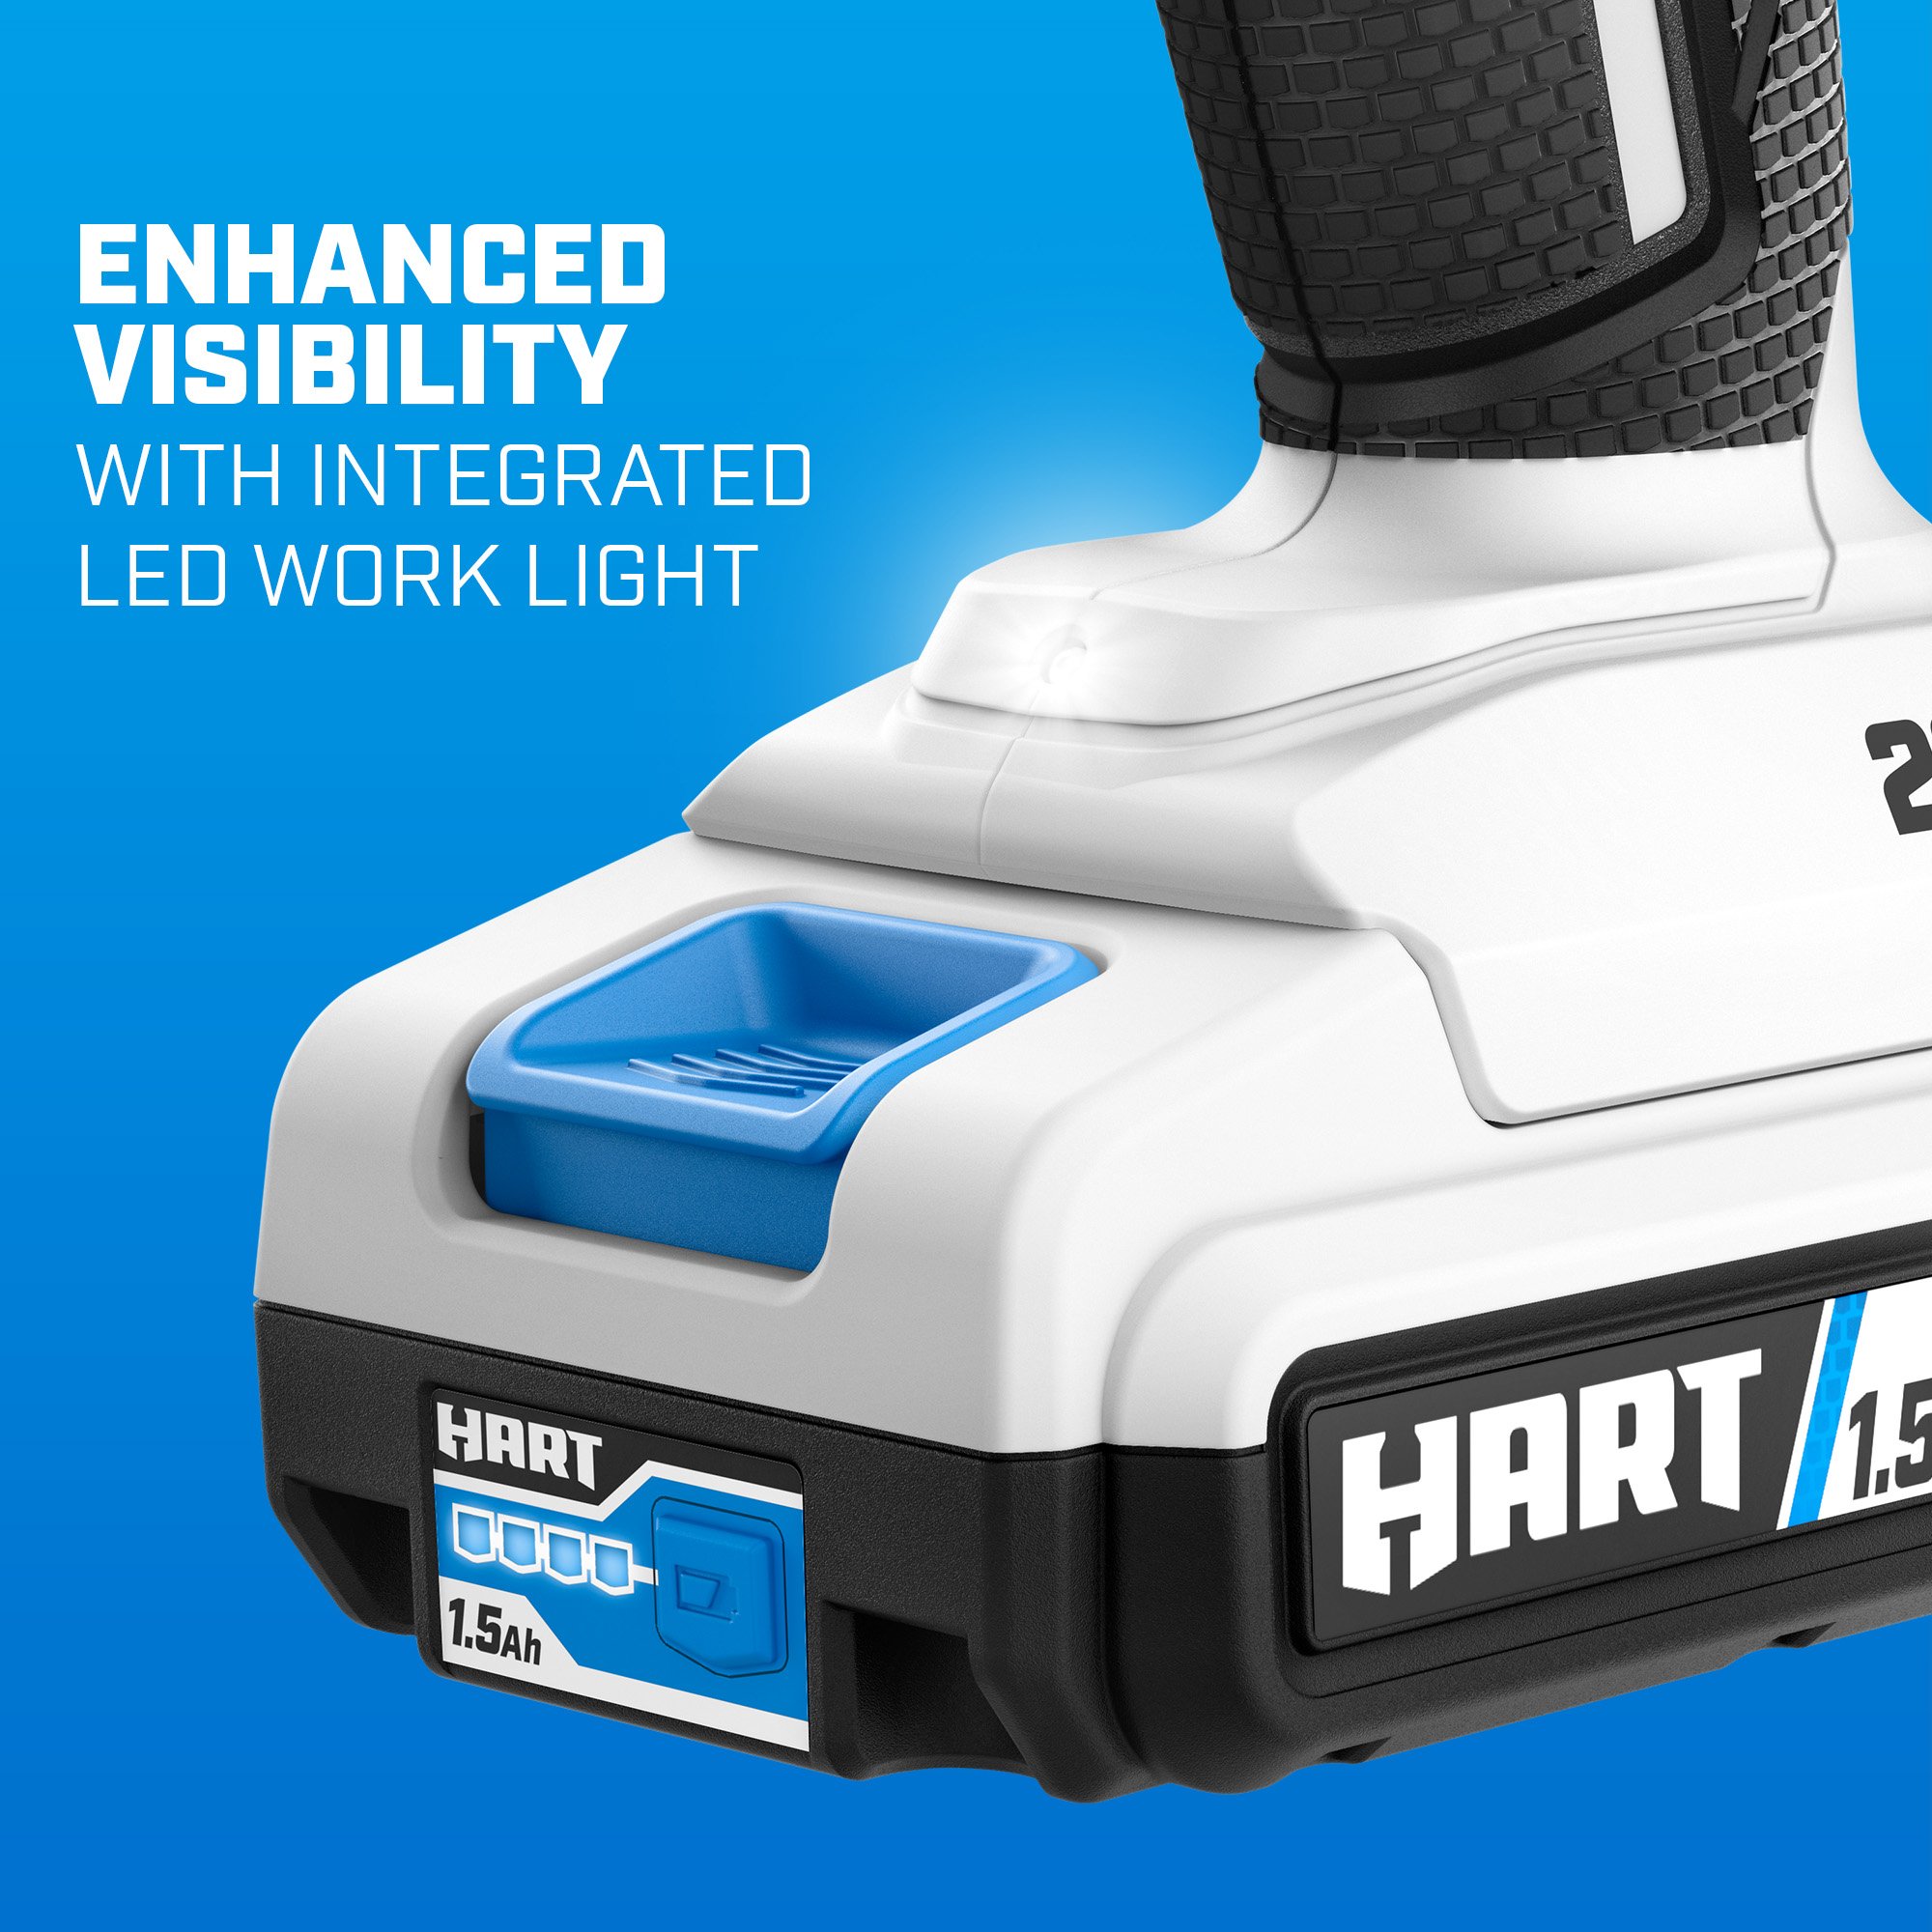 enhanced visibility with integrated LED work light